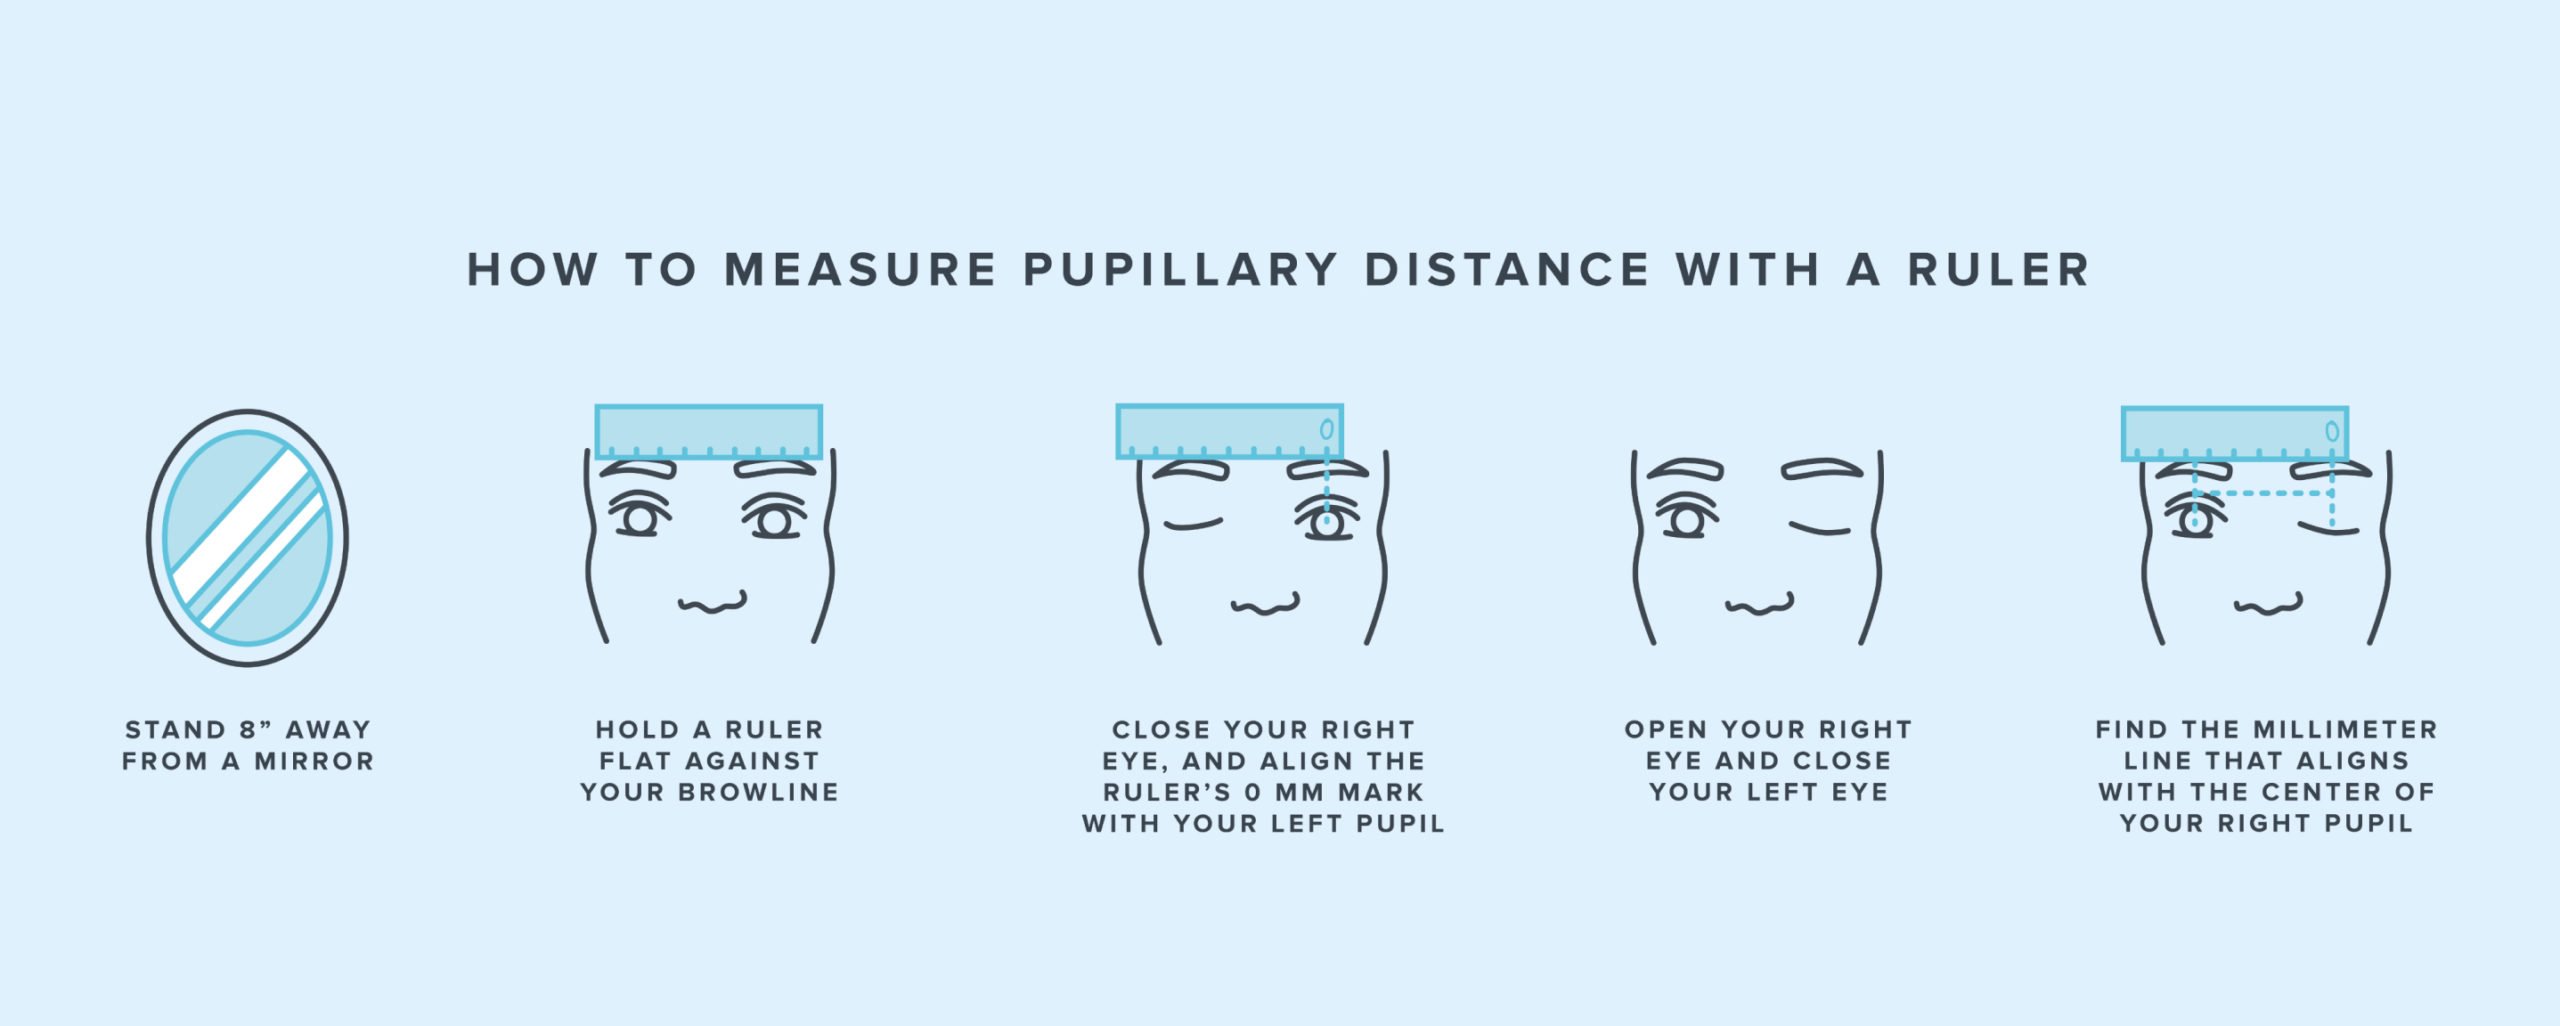 Infographic illustration how to measure pupillary distance with a ruler